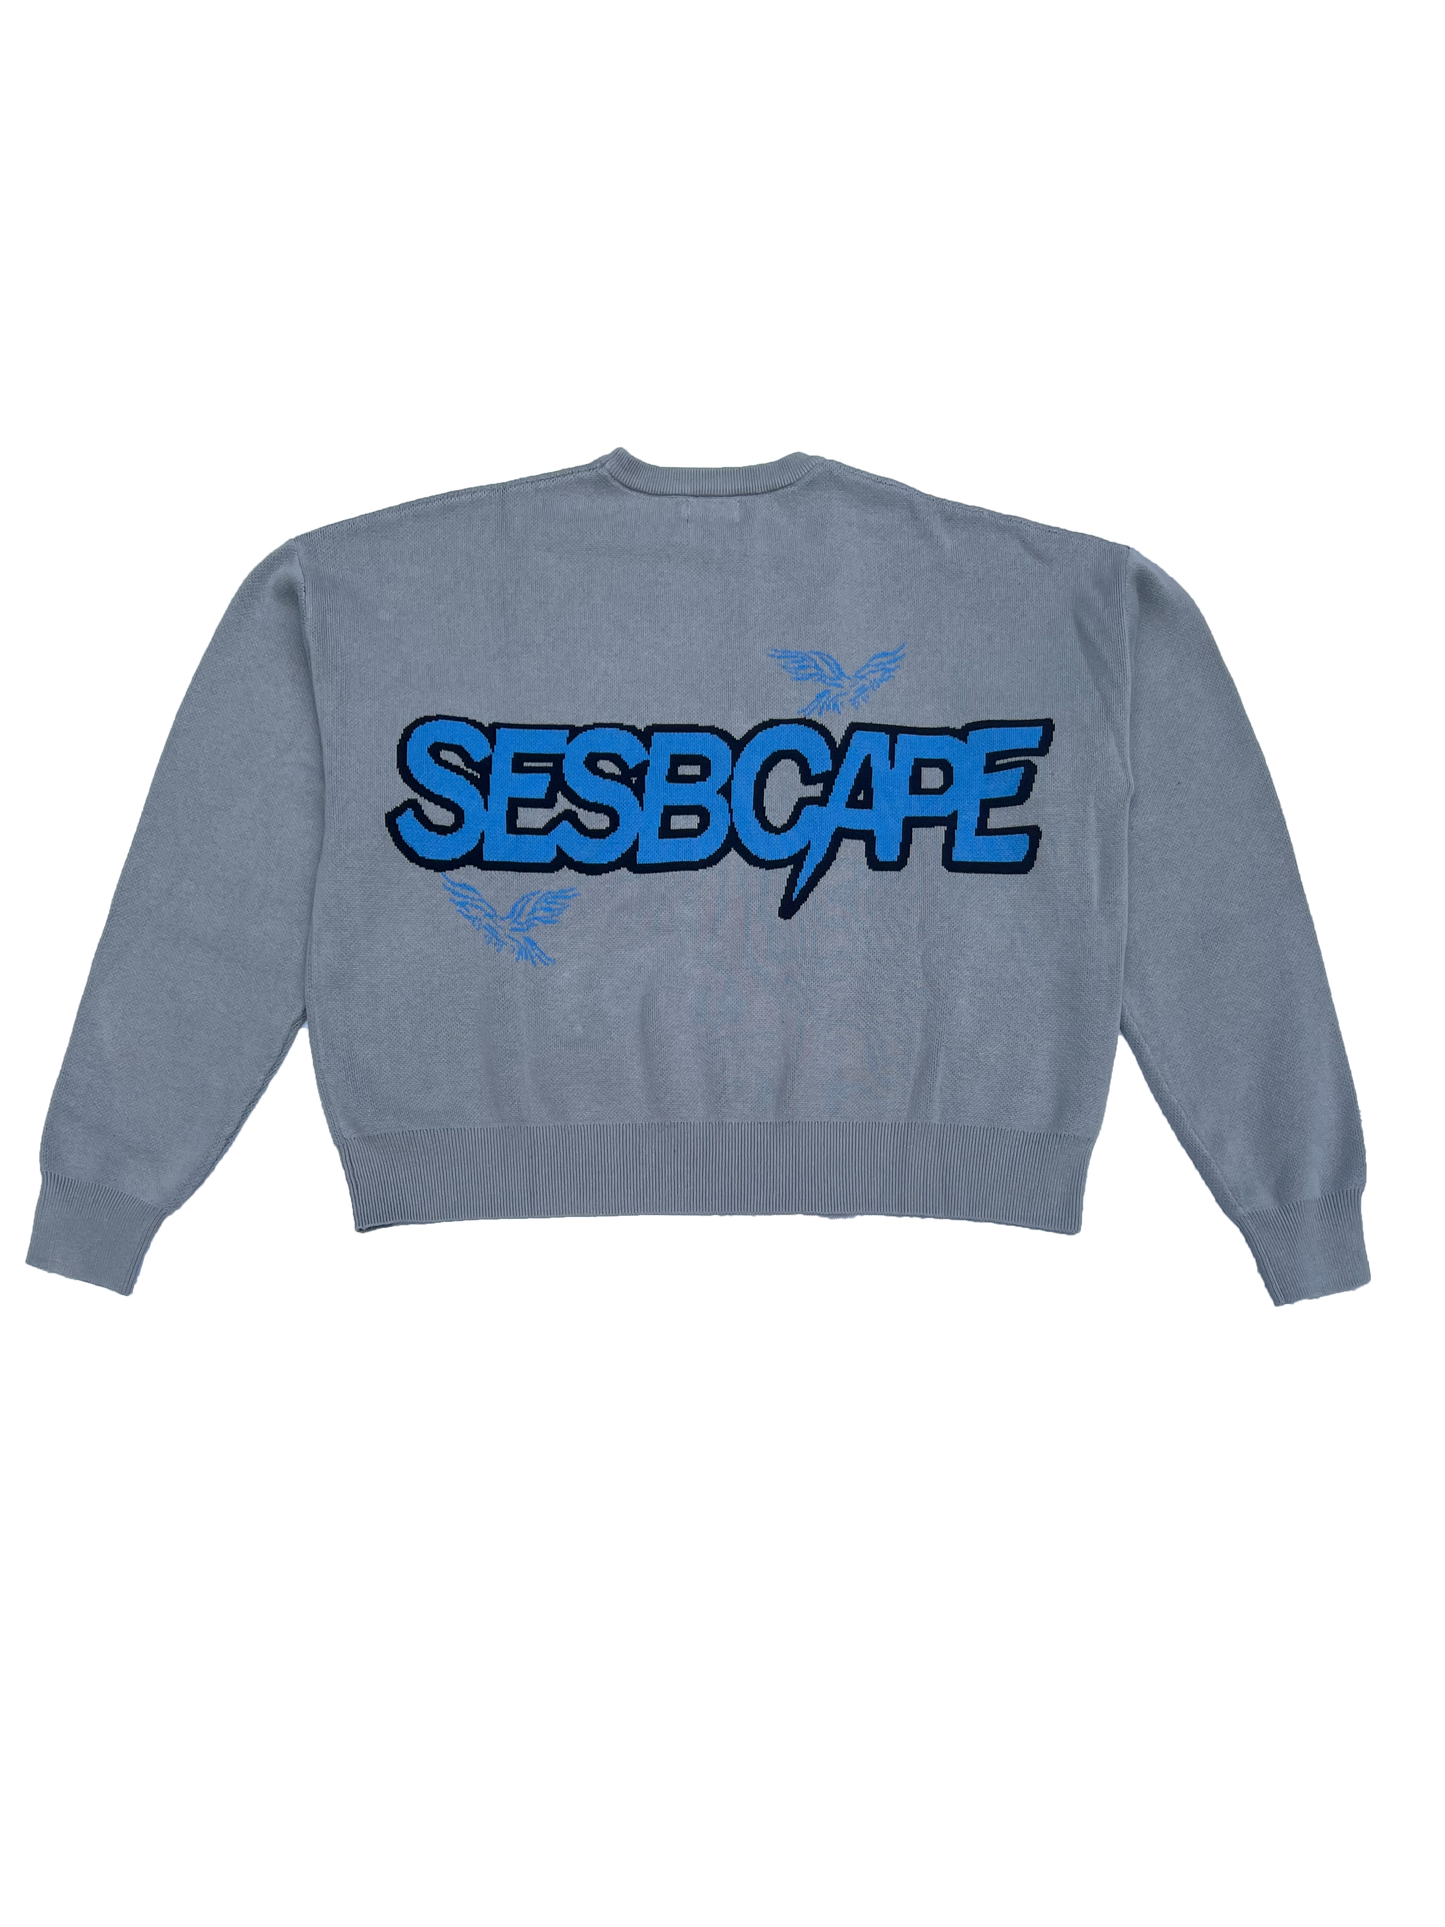 SES GreyY Sweater | GreyY Sweater | Sesbcape